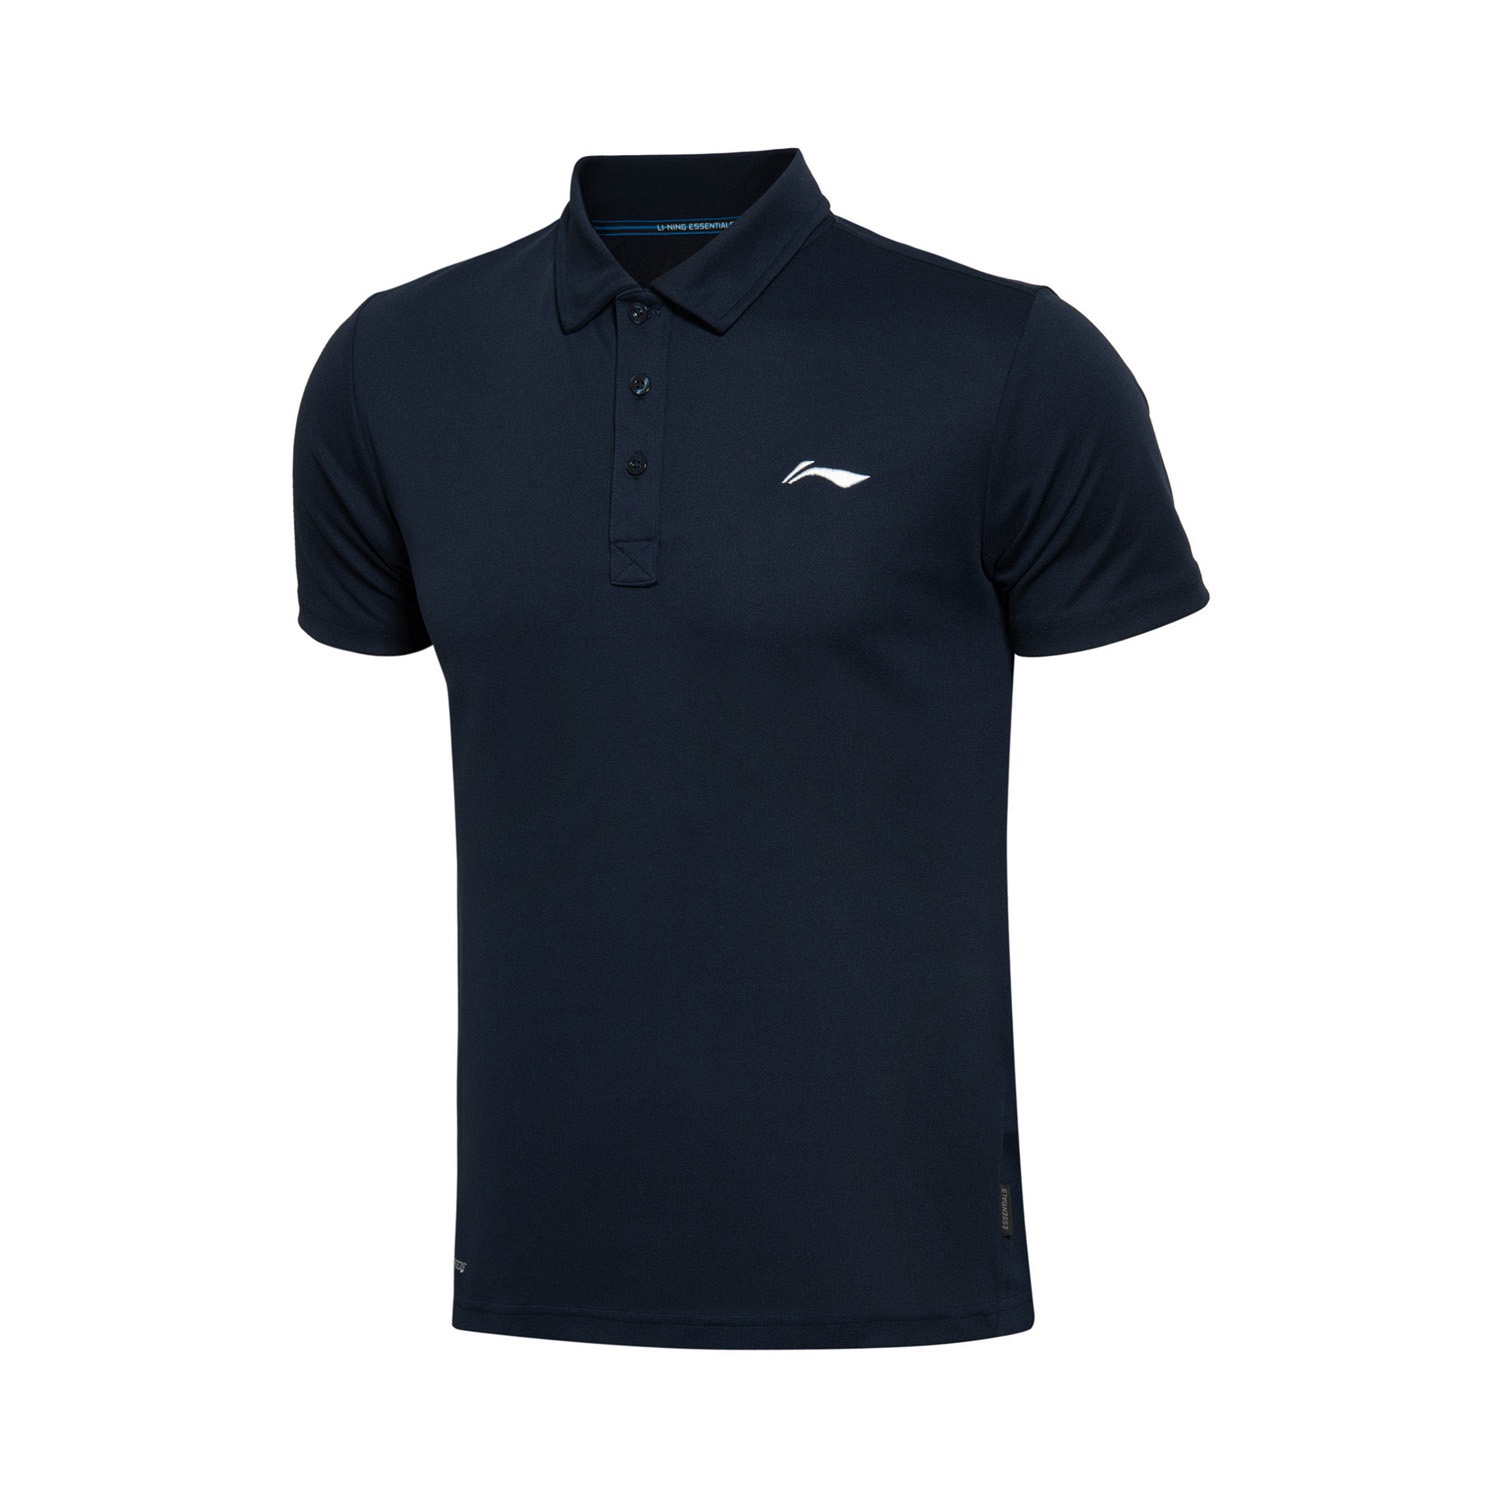 Polo sport homme LINING APLL027 en polyester - Ref 551802 Image 1